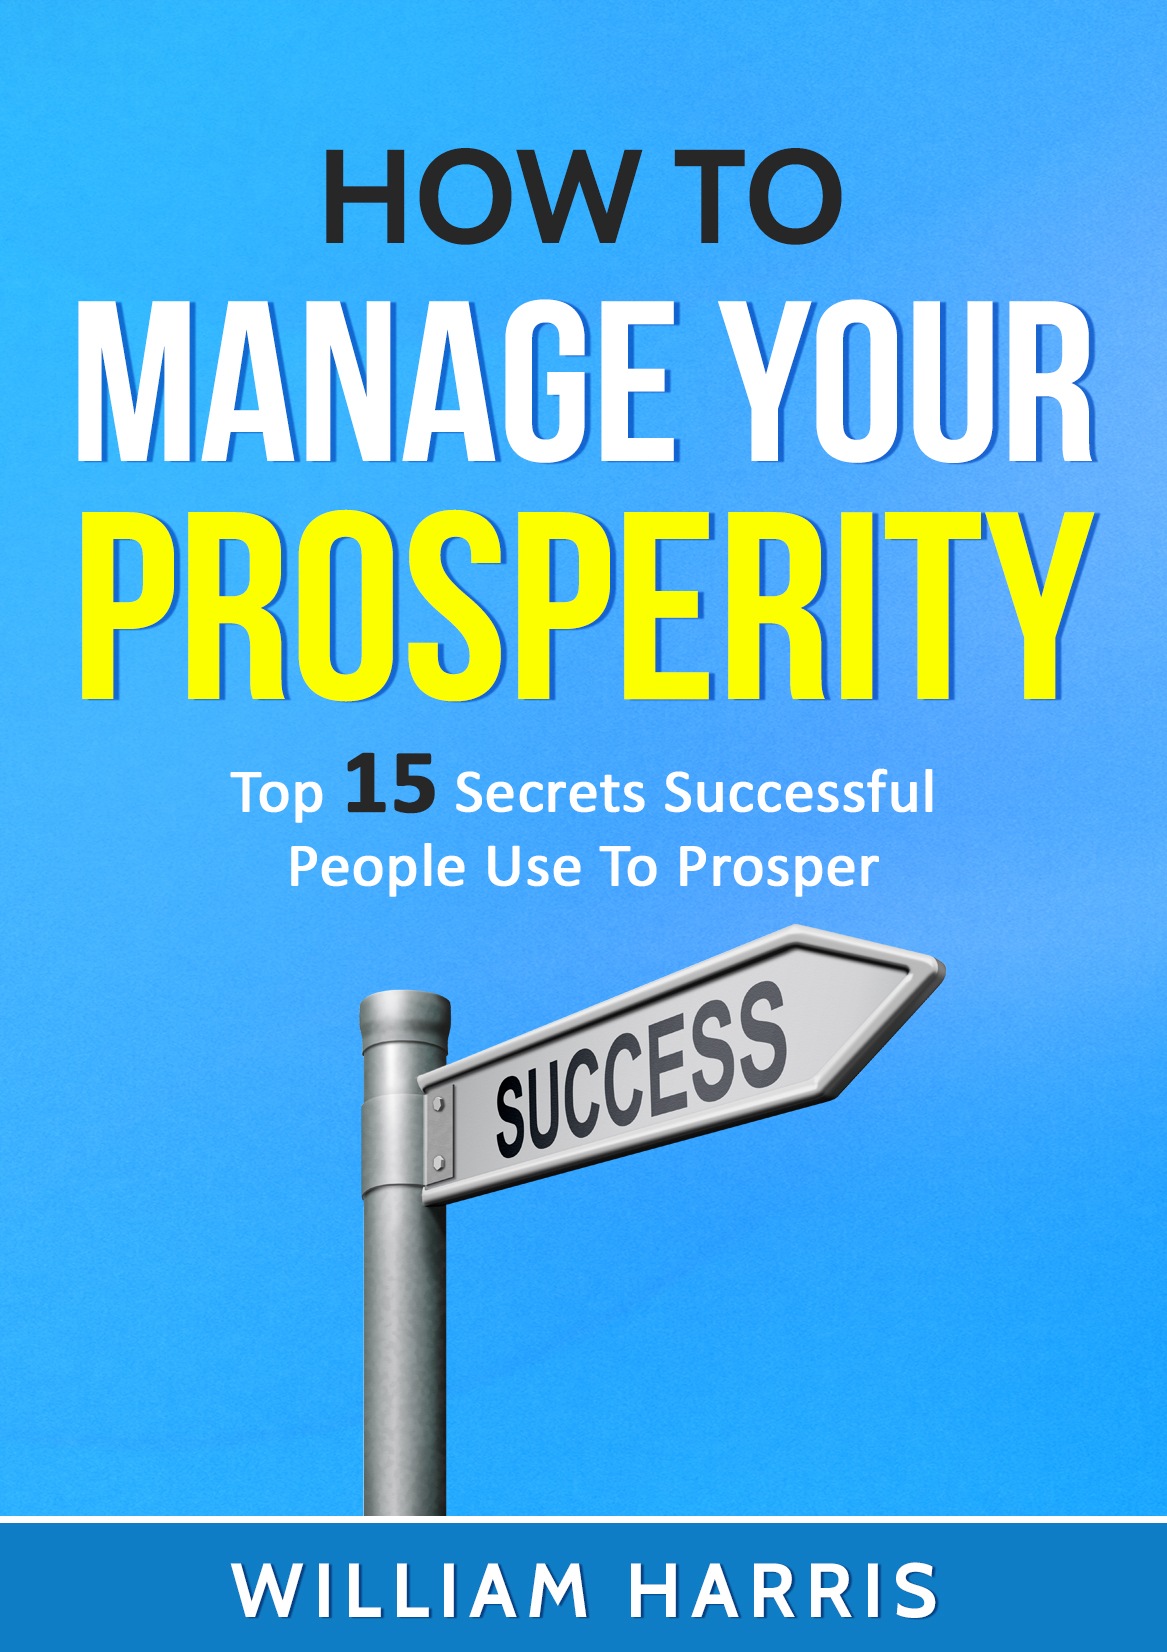 FREE: How To Manage Your Prosperity by William Harris